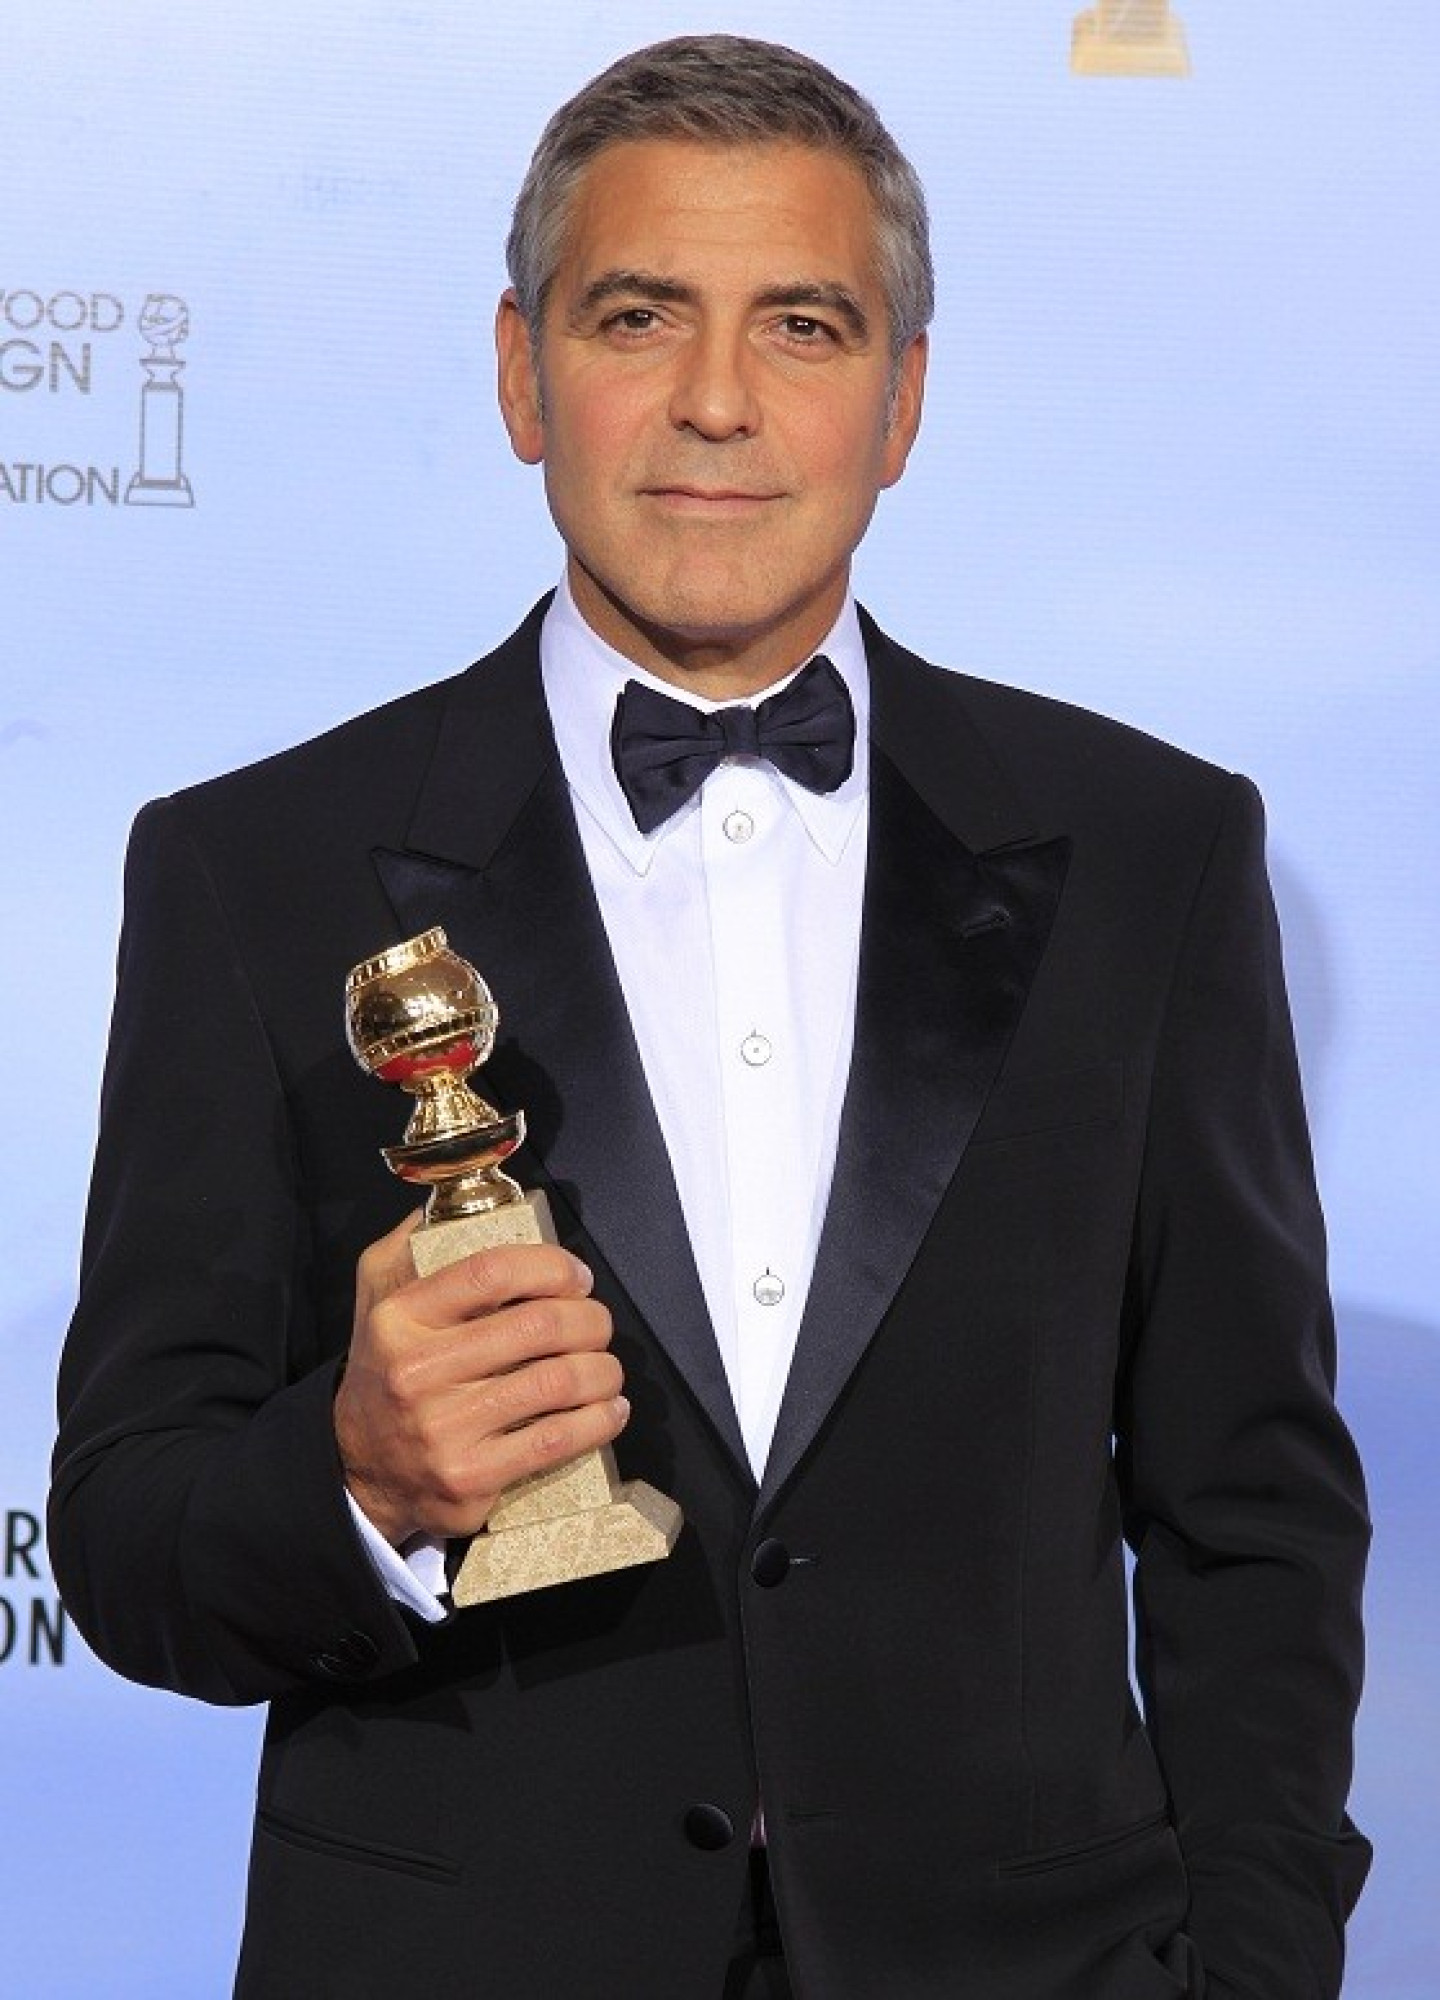 George Clooney poses with his award for best actor in a motion picure - drama for &quot;The Descendants,&quot; backstage in Beverly Hills (Reuters)